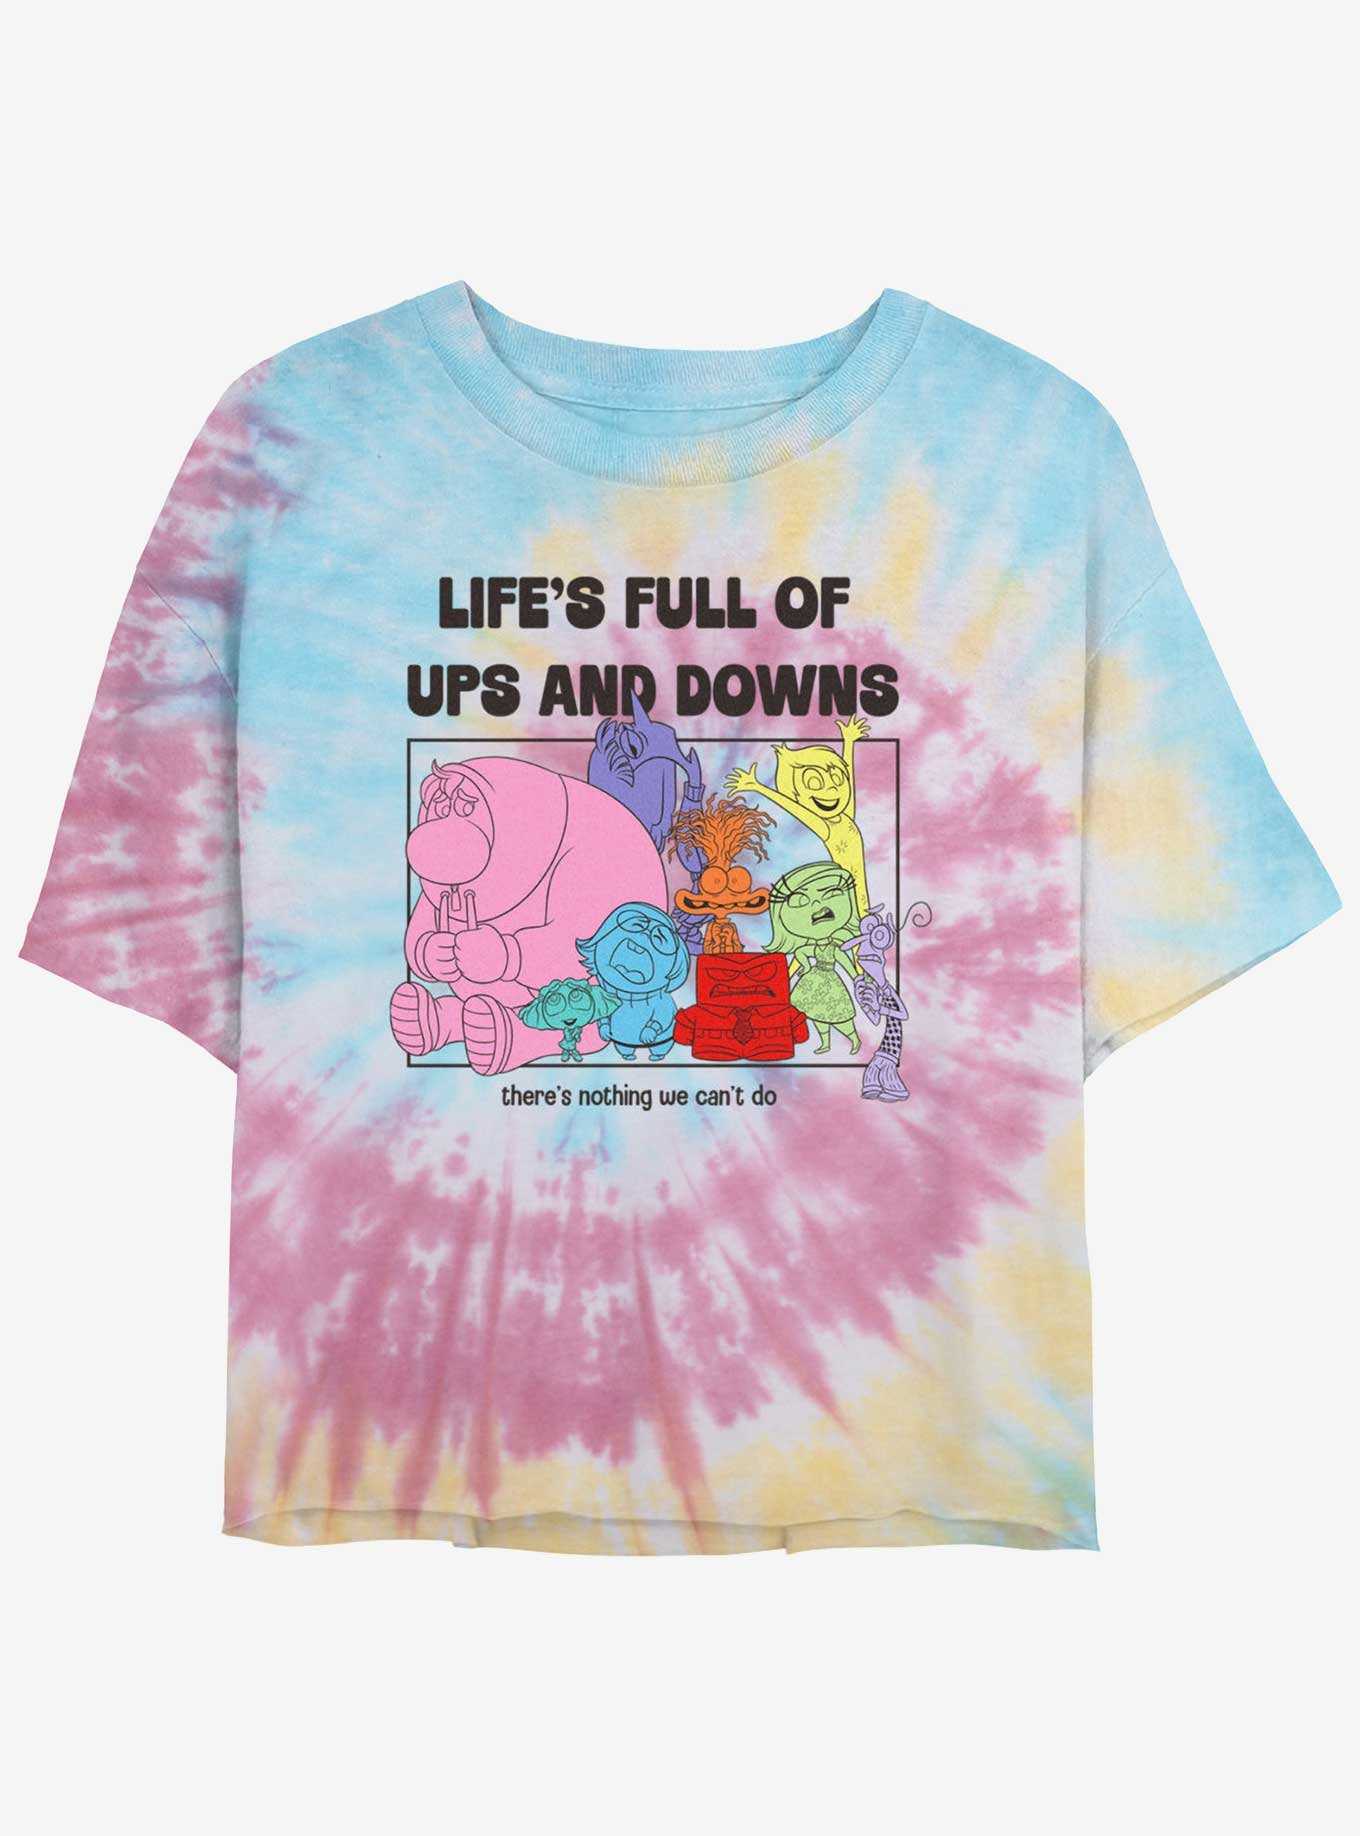 Disney Pixar Inside Out 2 Life's Full Of Ups And Downs Girls Tie-Dye Crop T-Shirt, , hi-res